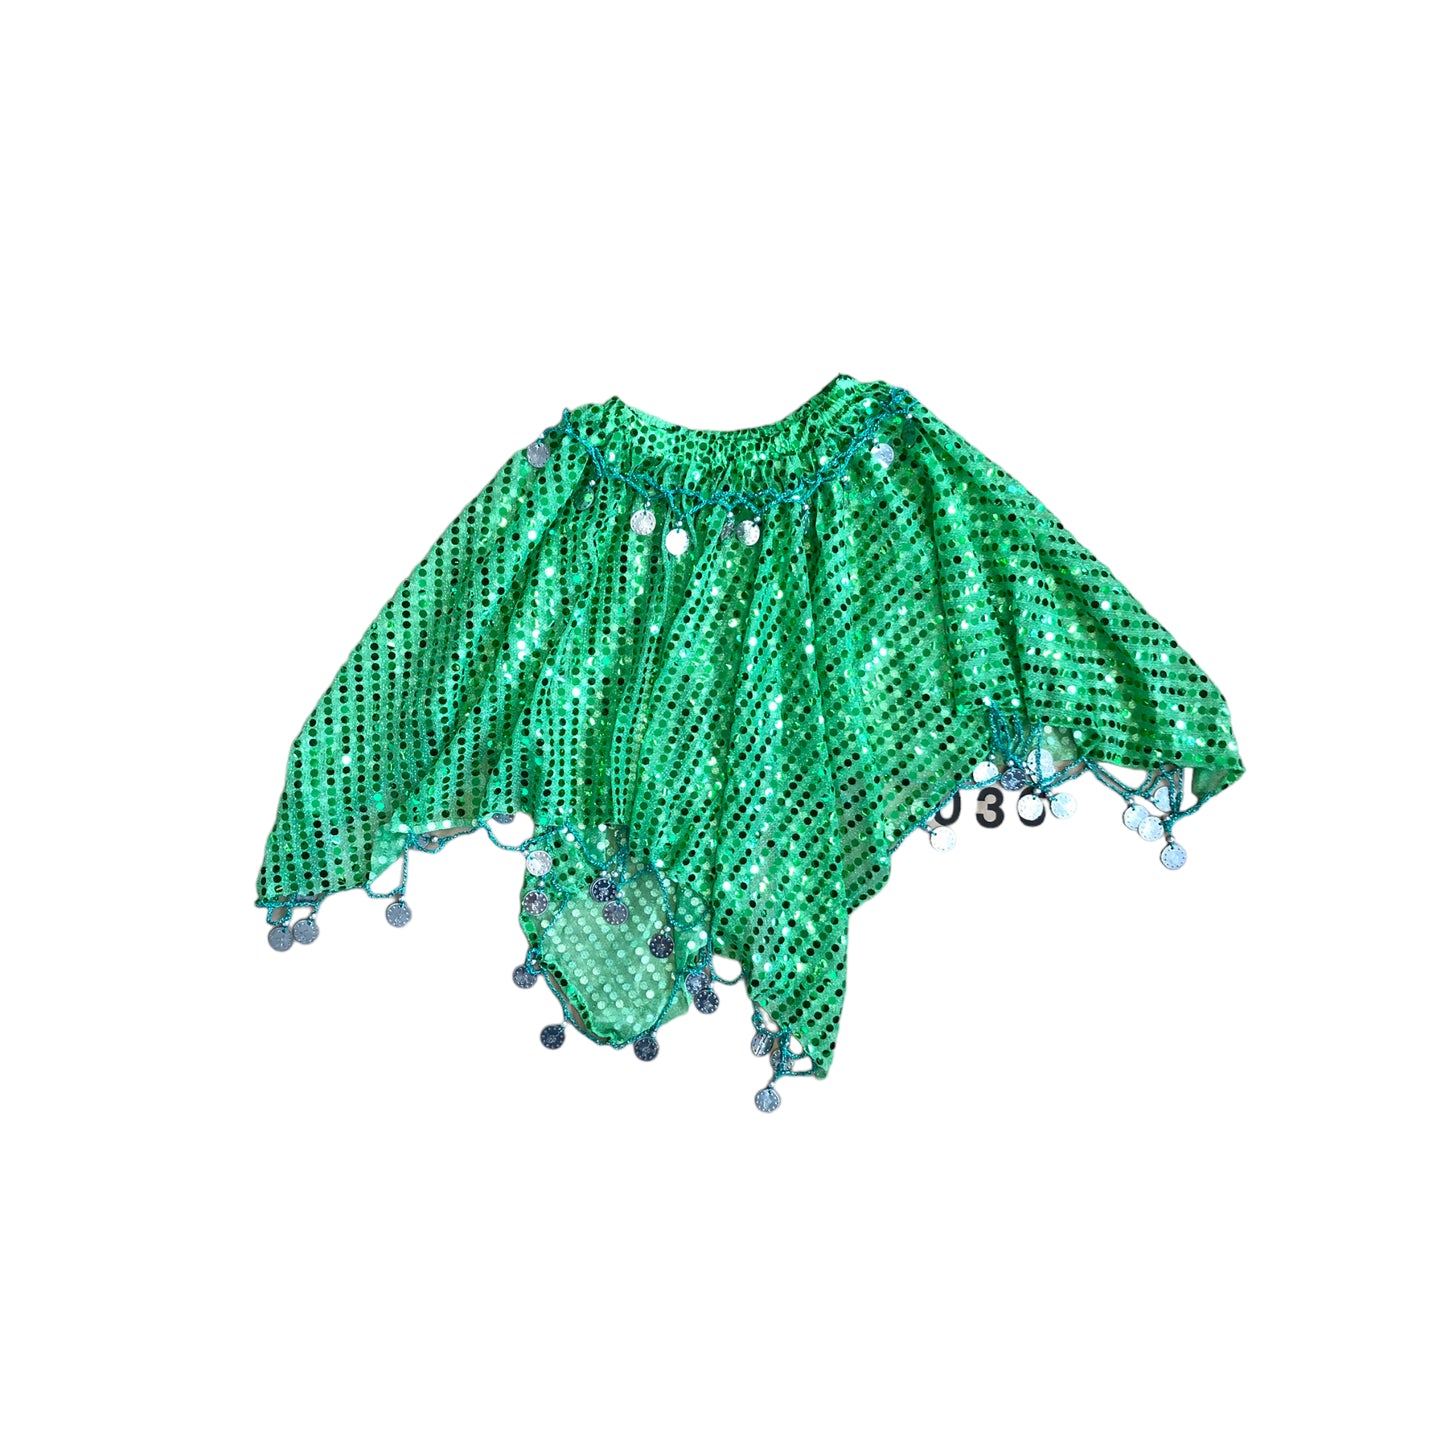 Belly dancer skirt - Green (5/7 years old)